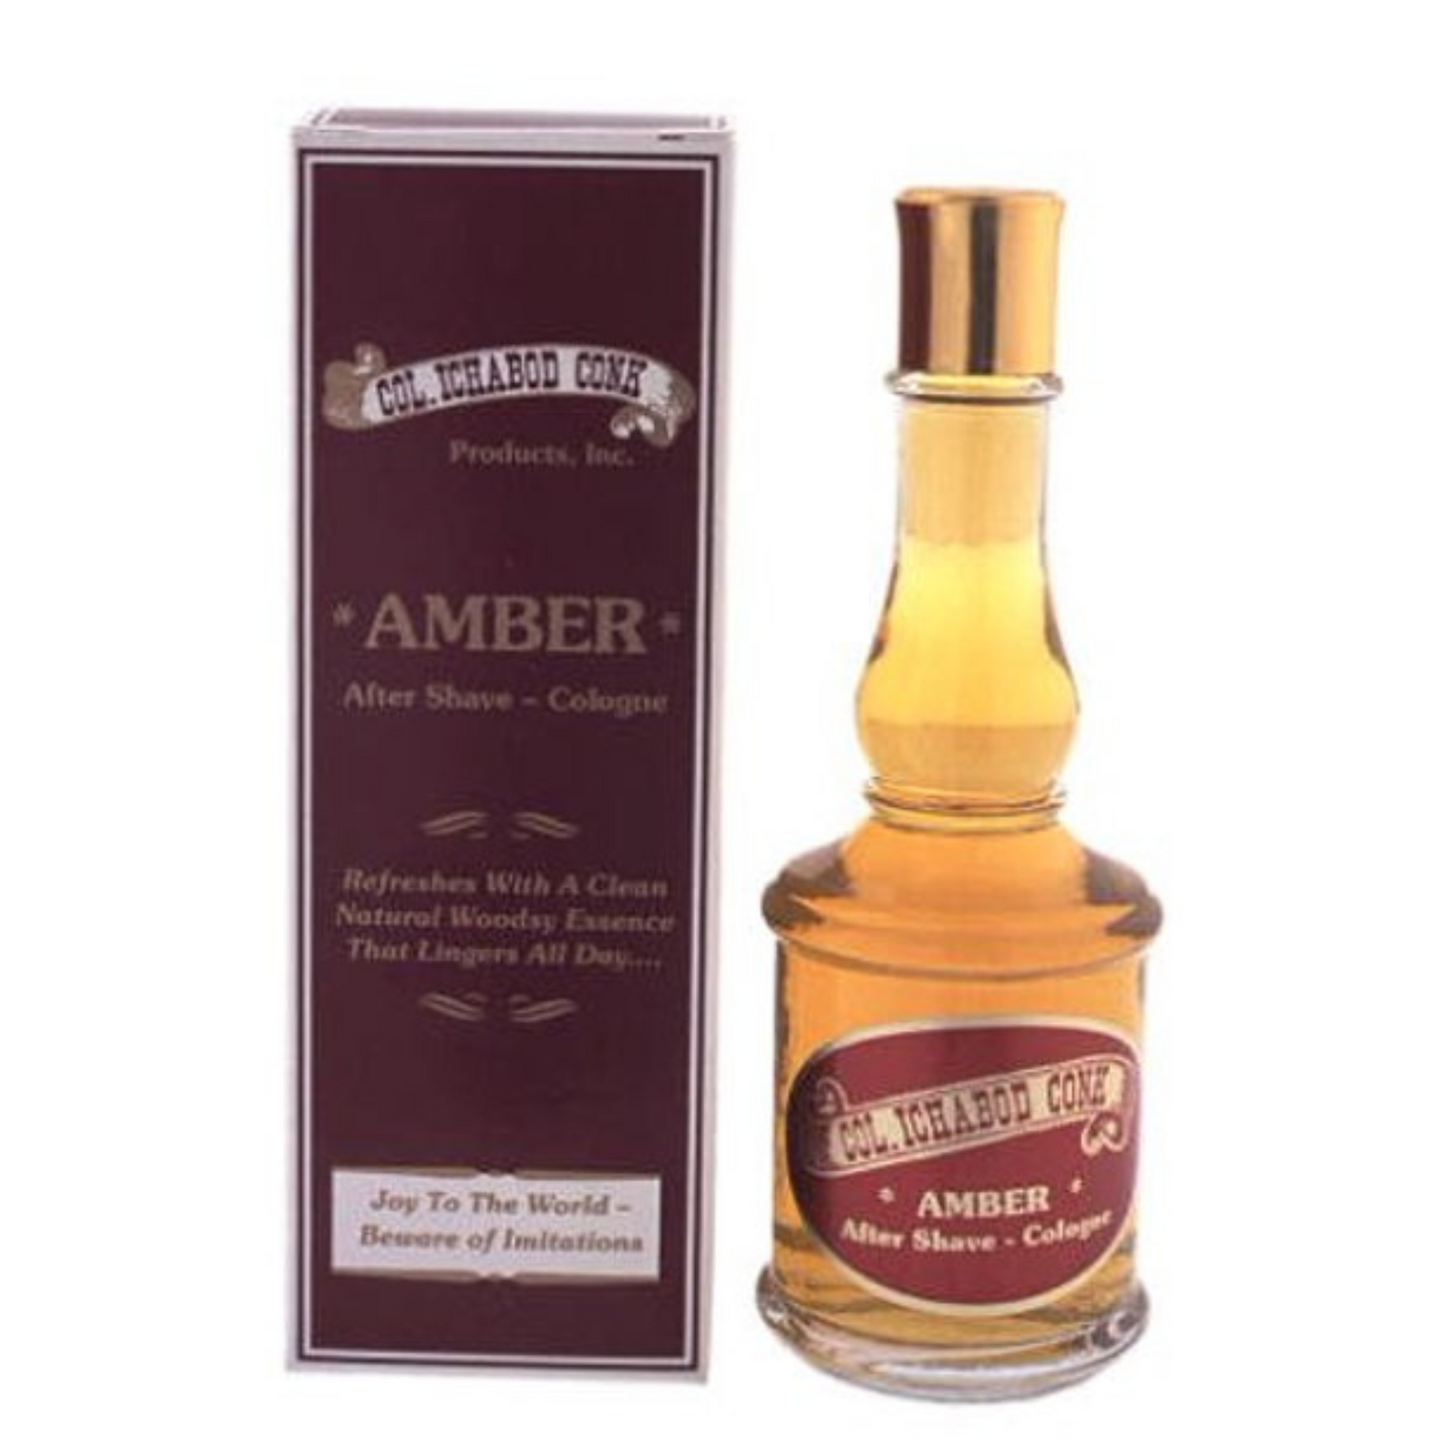 Primary image of Amber After Shave Cologne